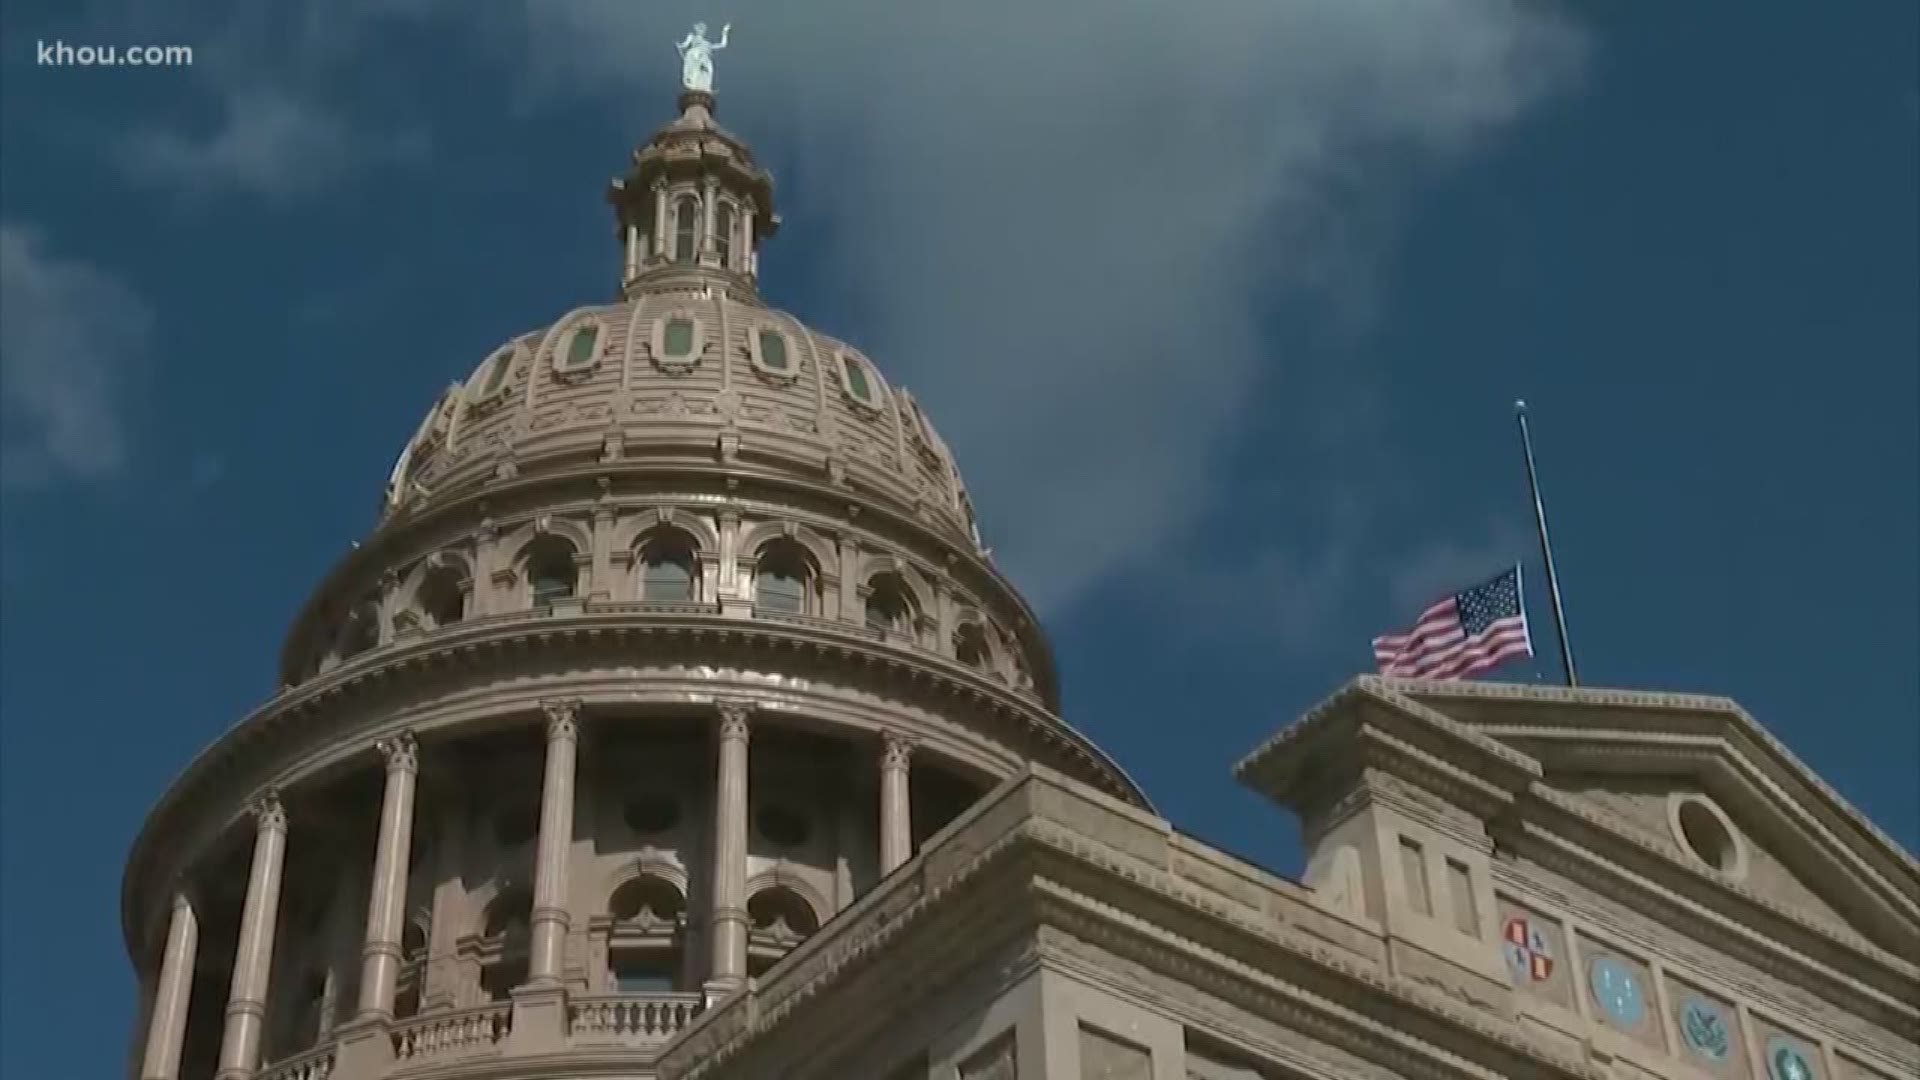 The Texas Senate voted to advance a property tax bill reform bill. It would force cities and counties to get voter approval to raise property taxes more than 3.5 percent over the previous year.